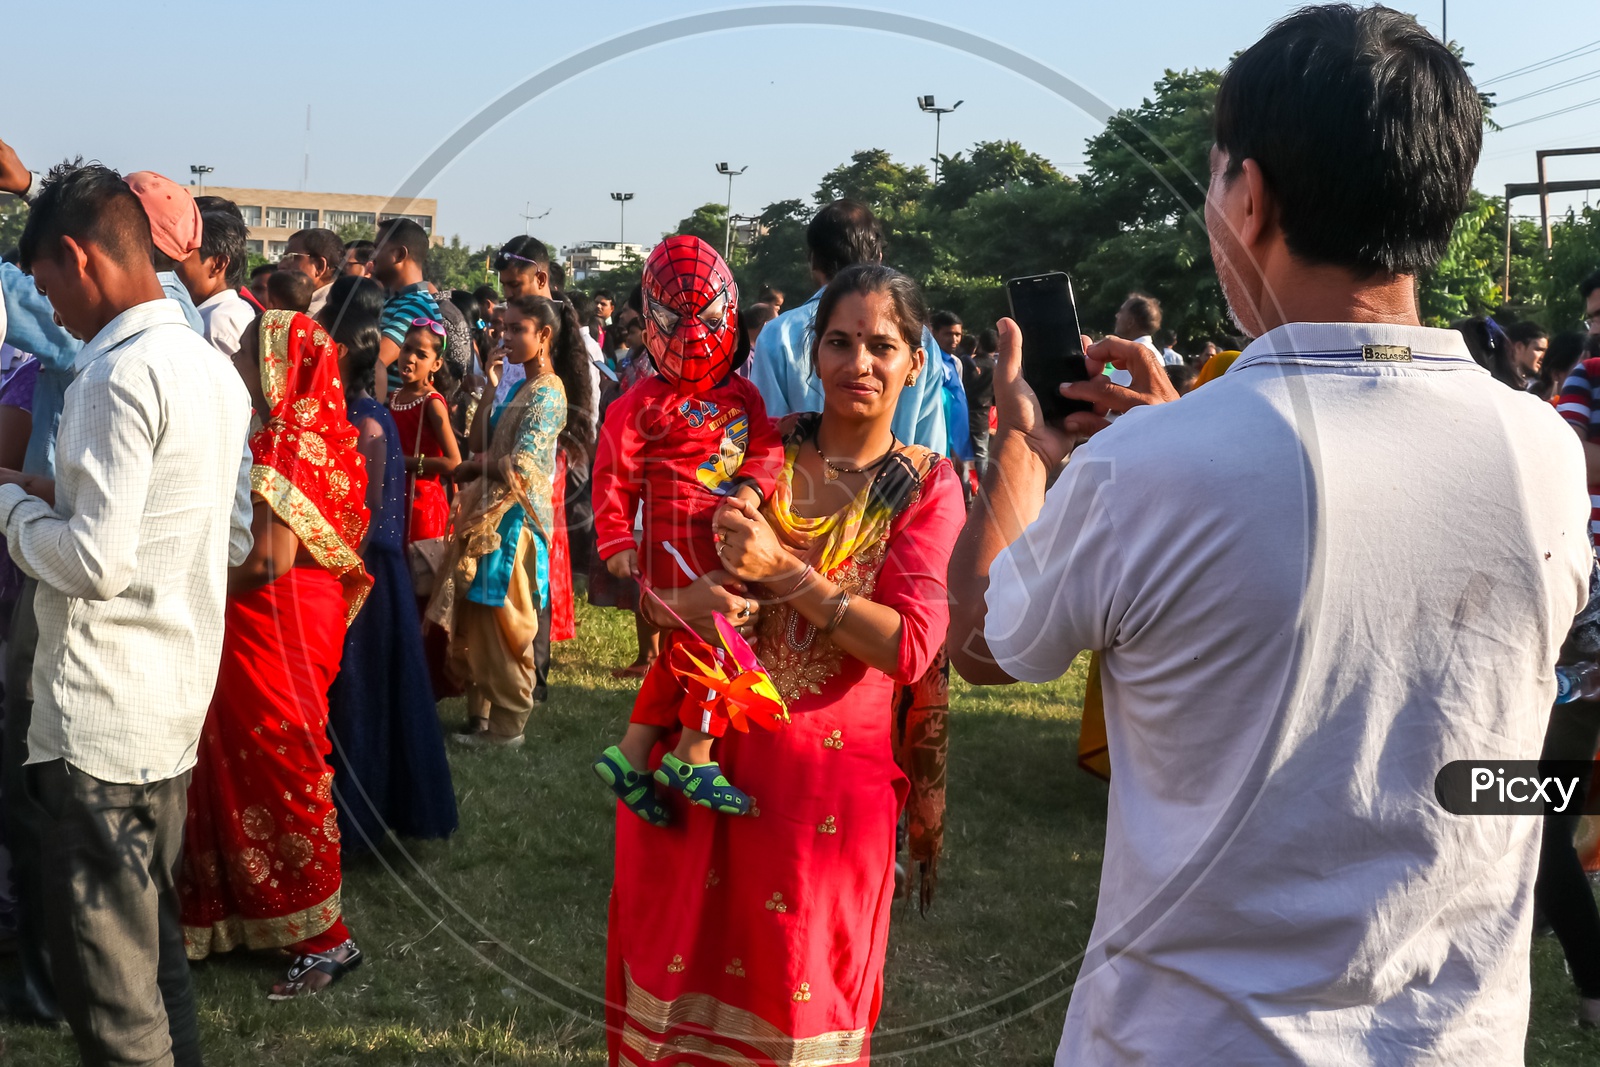 A man clicking a photo of a boy along with his mother amongst crowd